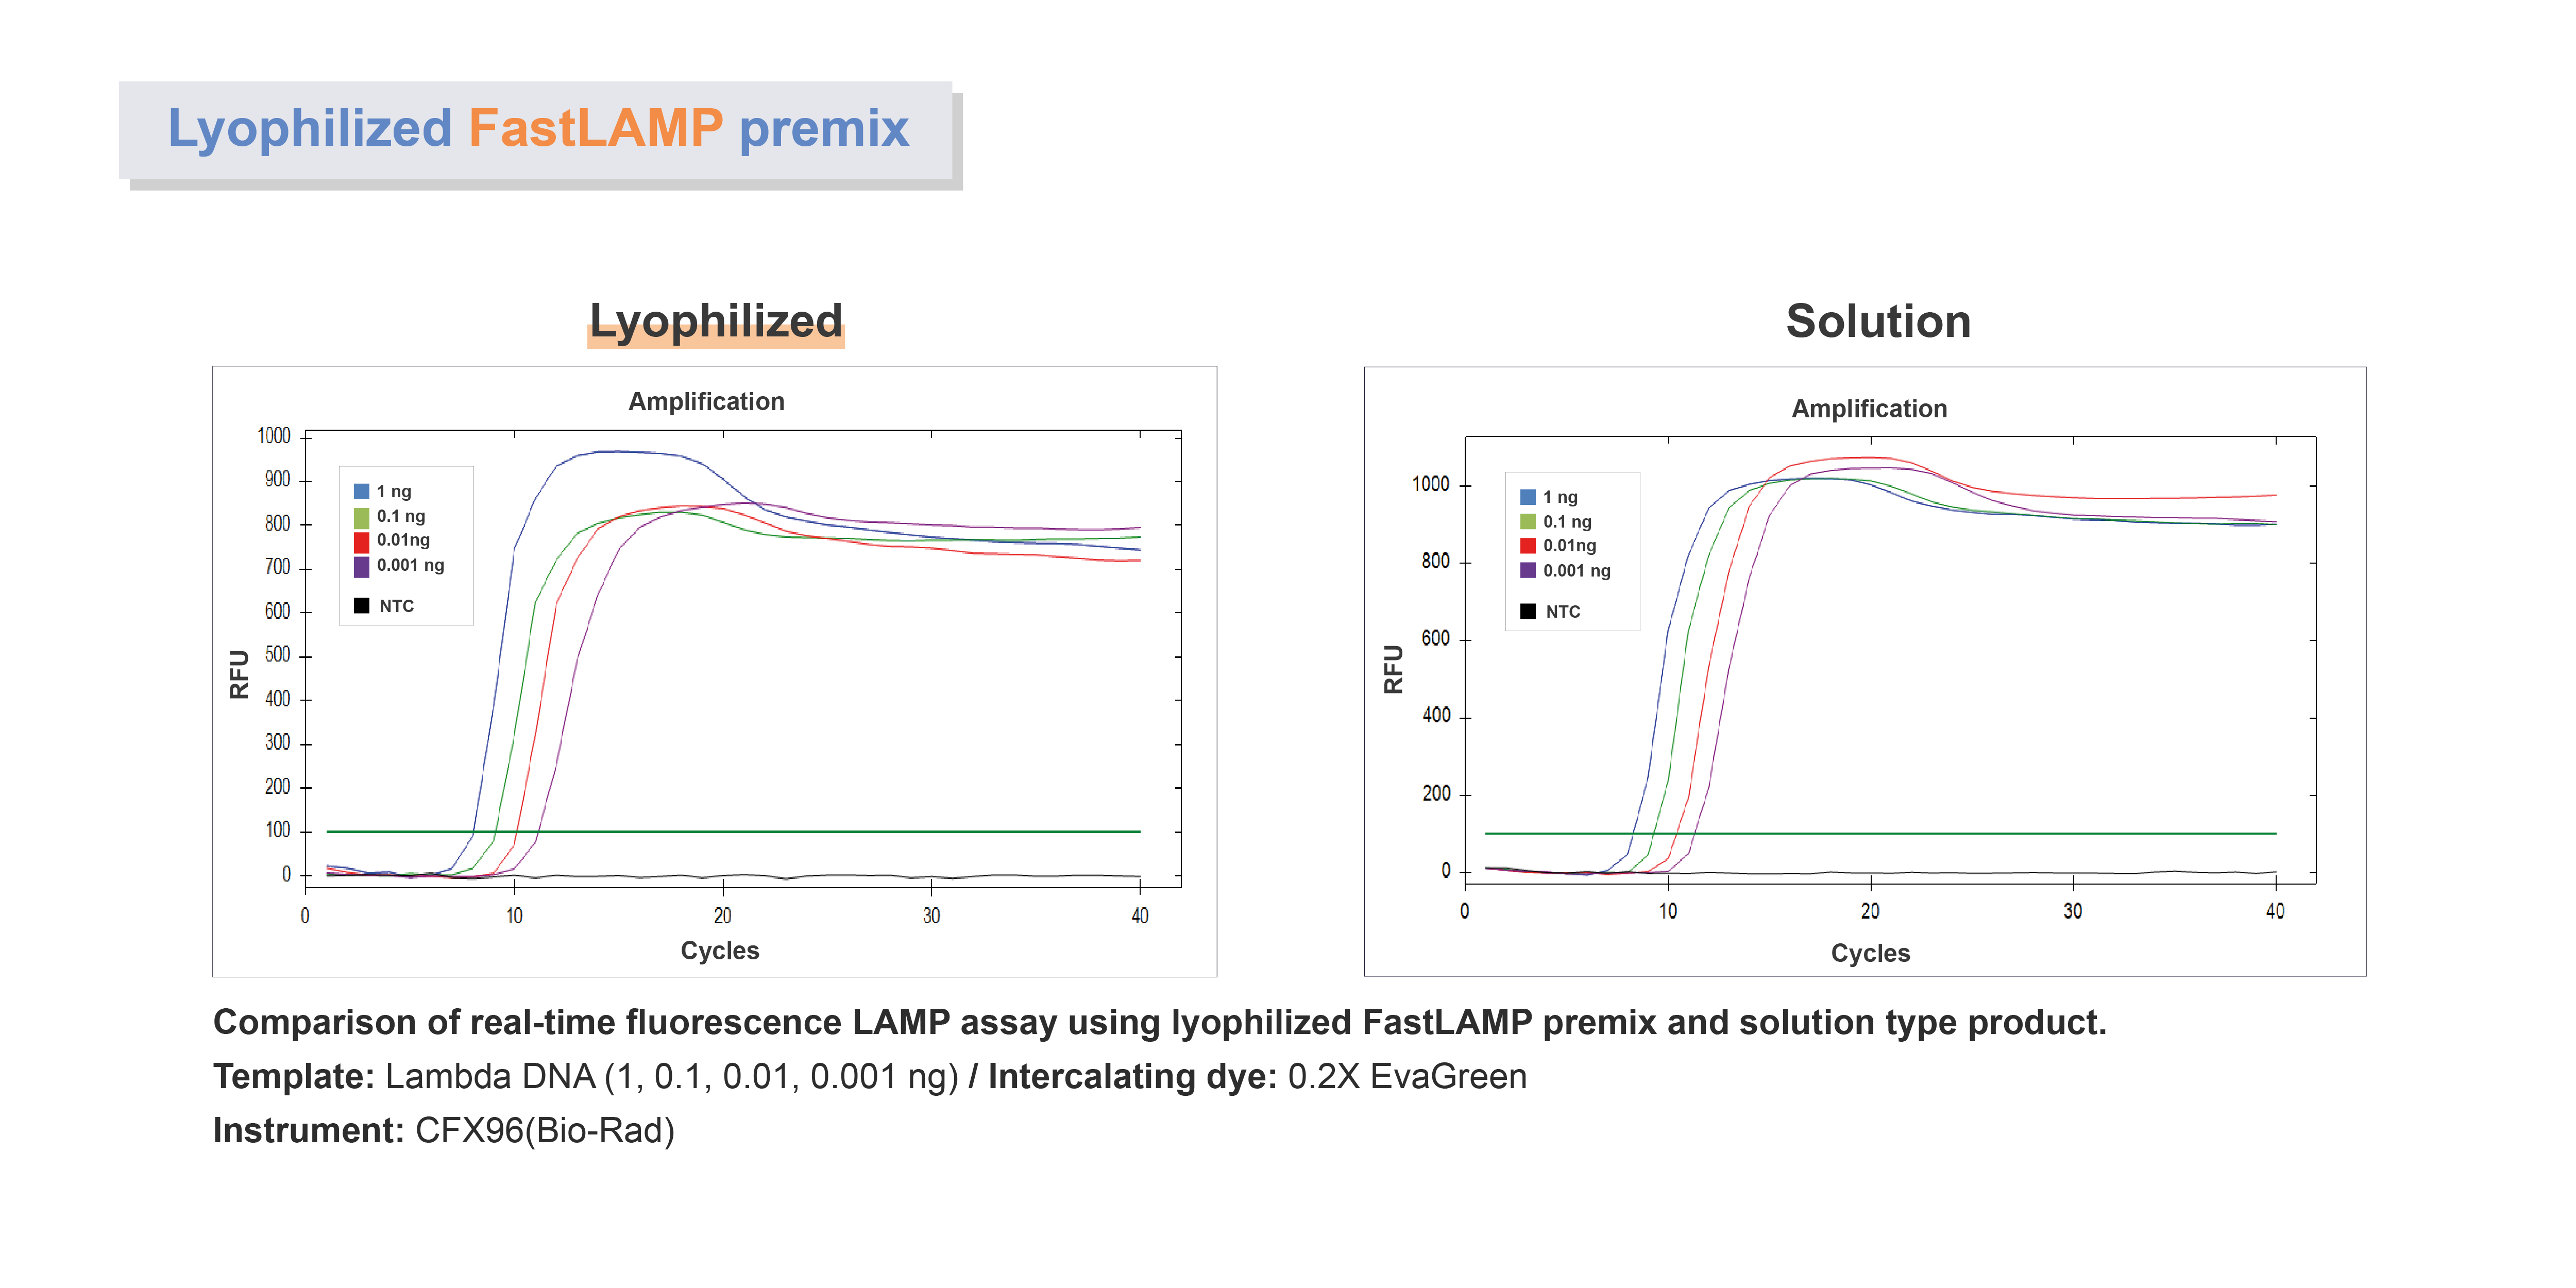 LFLP_Figure. Comparison of real-time fluorescence LAMP assay using lyophilized FastLAMP premix and solution type product.